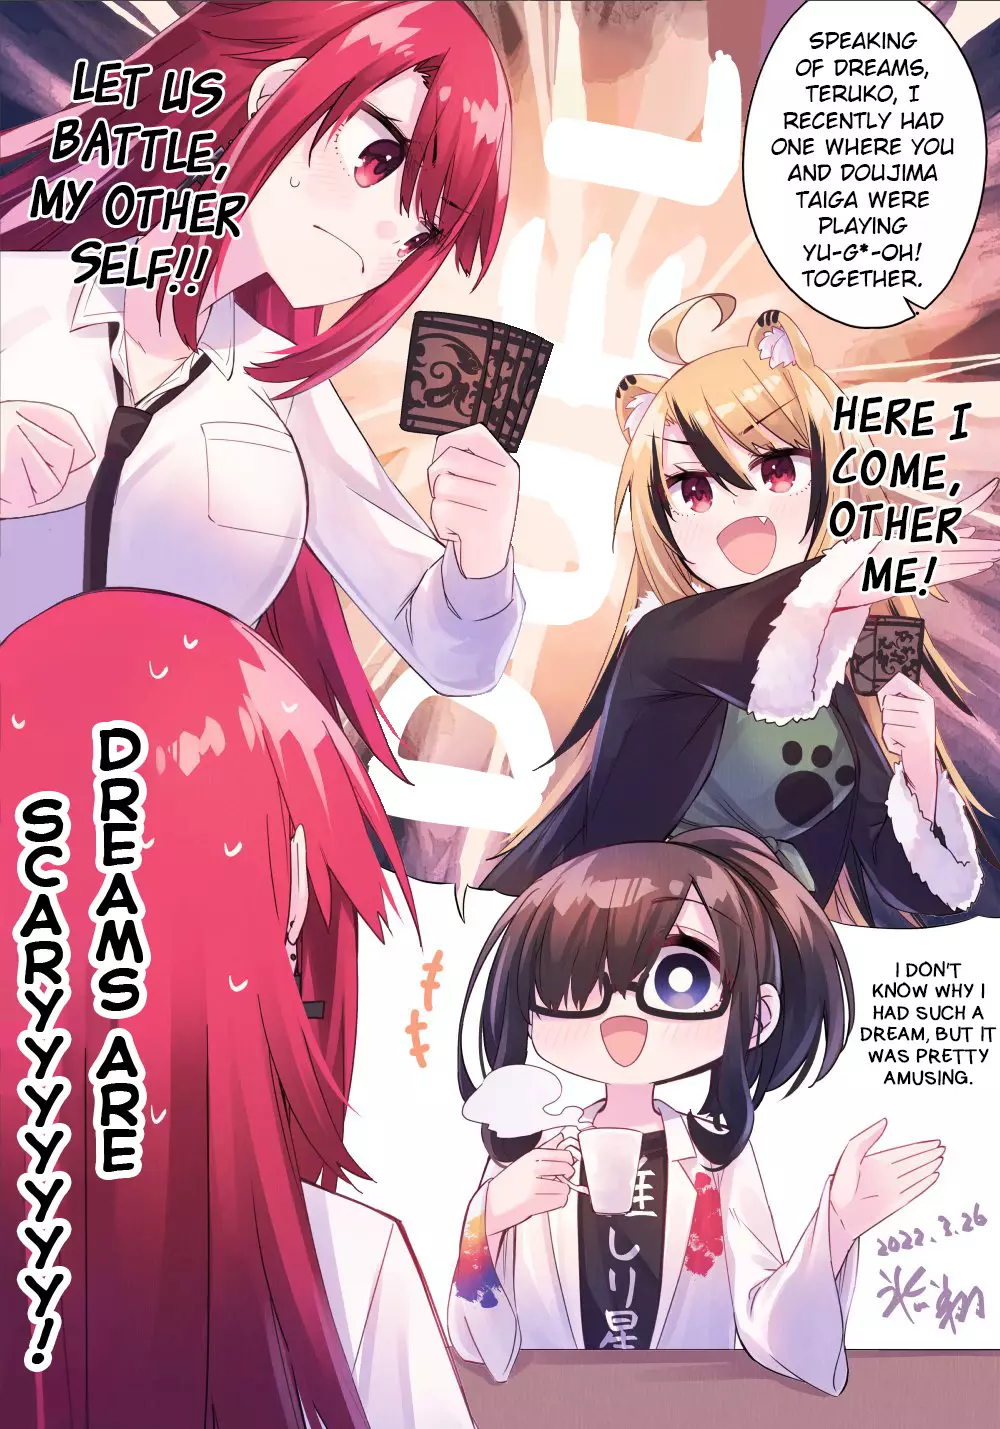 My Best Friend Who I Love Fell Completely In Love With My Vtuber Self - 21.5 page 1-abd32ee3